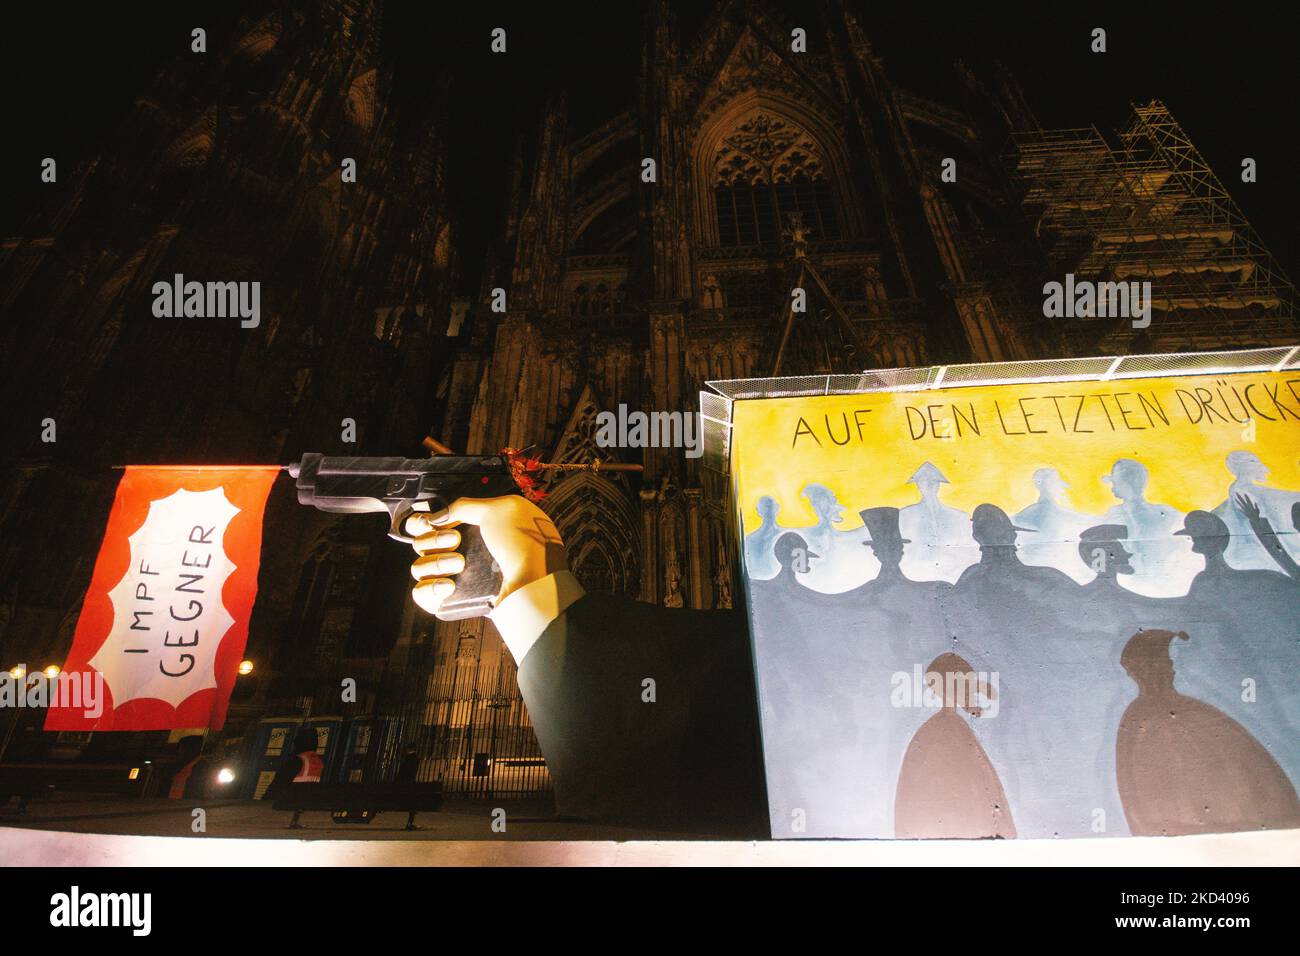 a Carnival float featuring vaccine skeptics flagi is illuminated in the city center of Cologne, Germany on Feb 28, 2022 during the tradition carnival Rose monday procession which was cancelled due to Ukraine war (Photo by Ying Tang/NurPhoto) Stock Photo